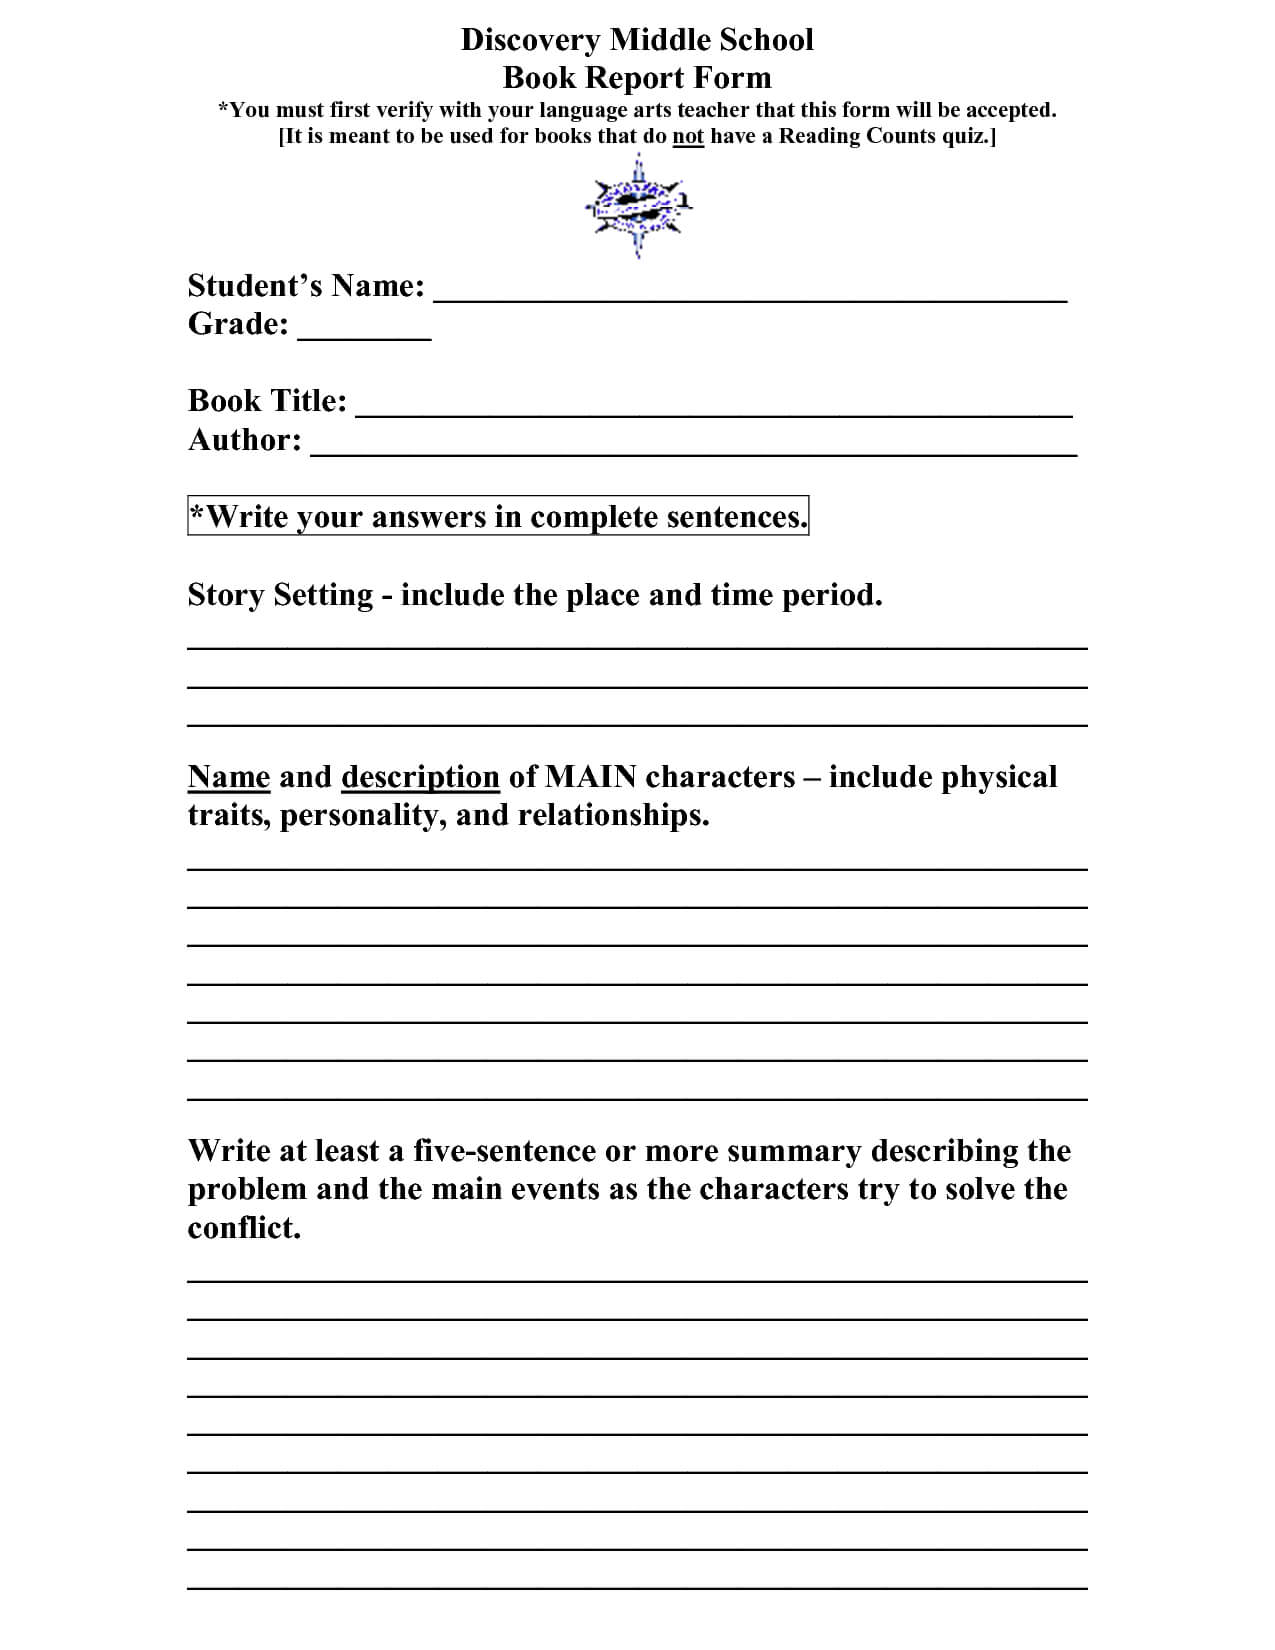 Scope Of Work Template | Book Report Templates, High School For High School Book Report Template